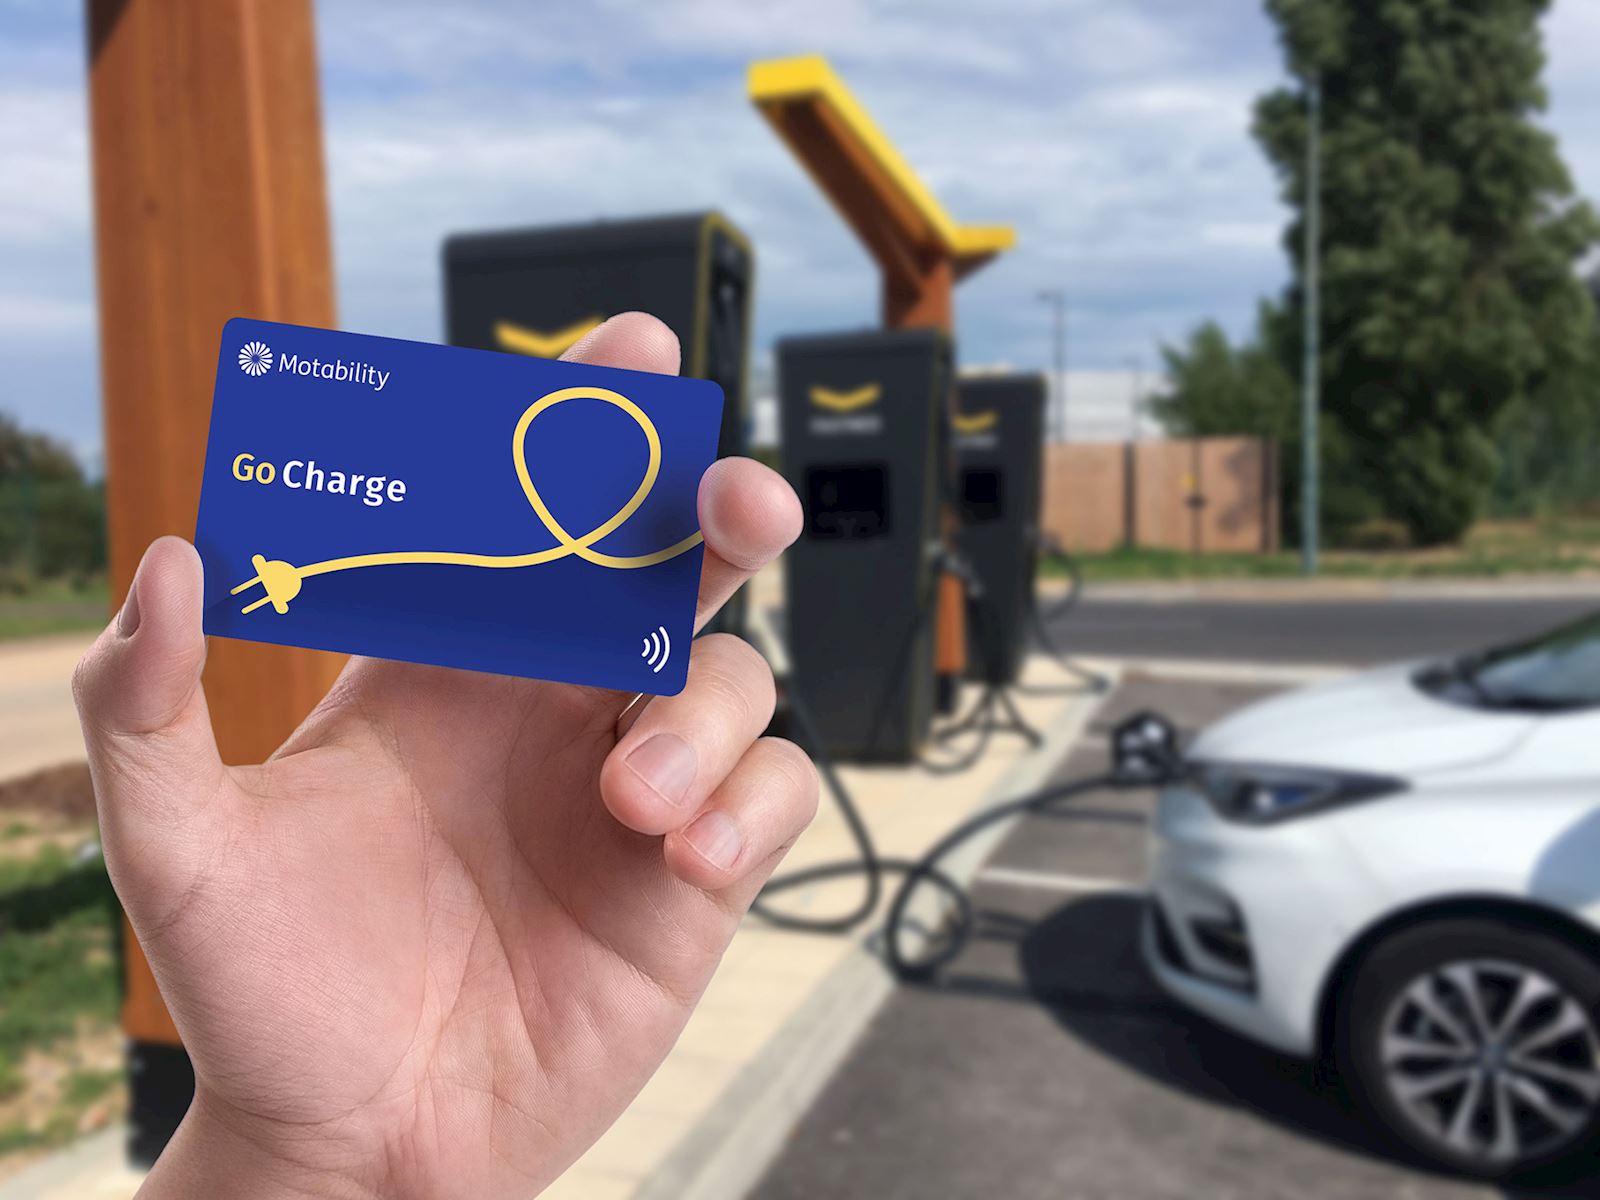 A Motability Go Charge Card being used at a chargepoint